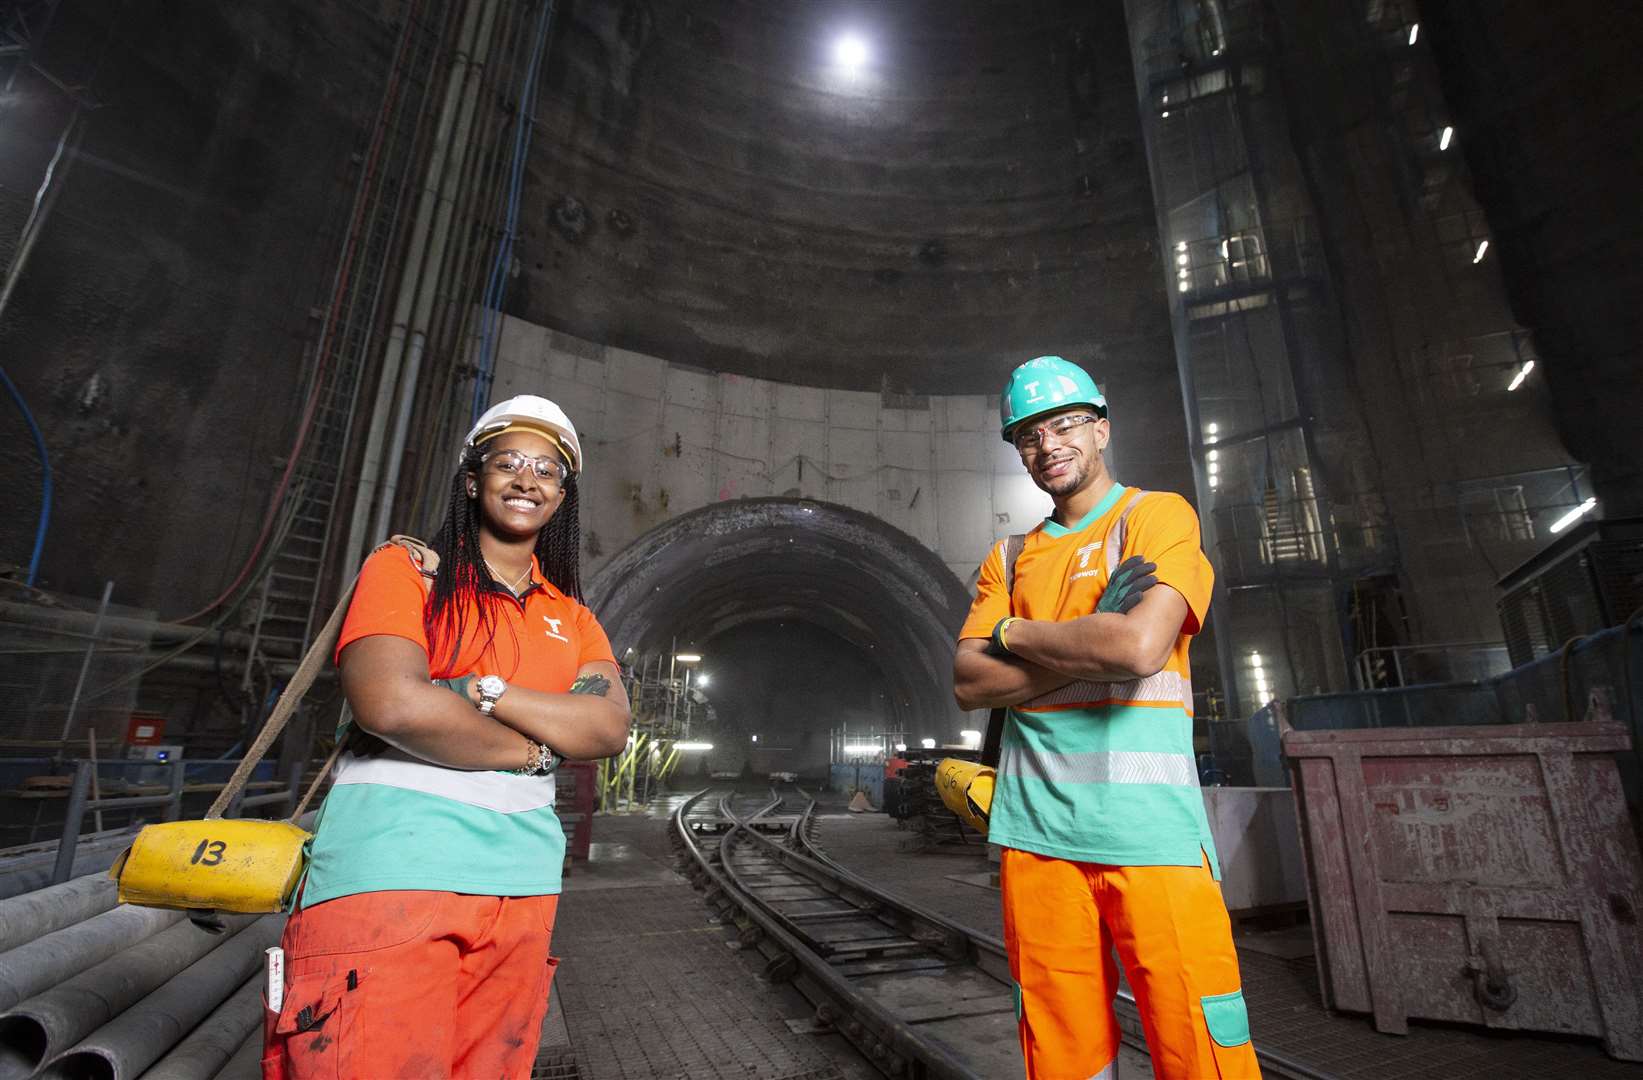 Wes Nelson meets apprentice civil engineer Kayla Browne during a visit to Tideway’s new ‘super sewer’ in Fulham, south-west London (Matt Alexander/PA)